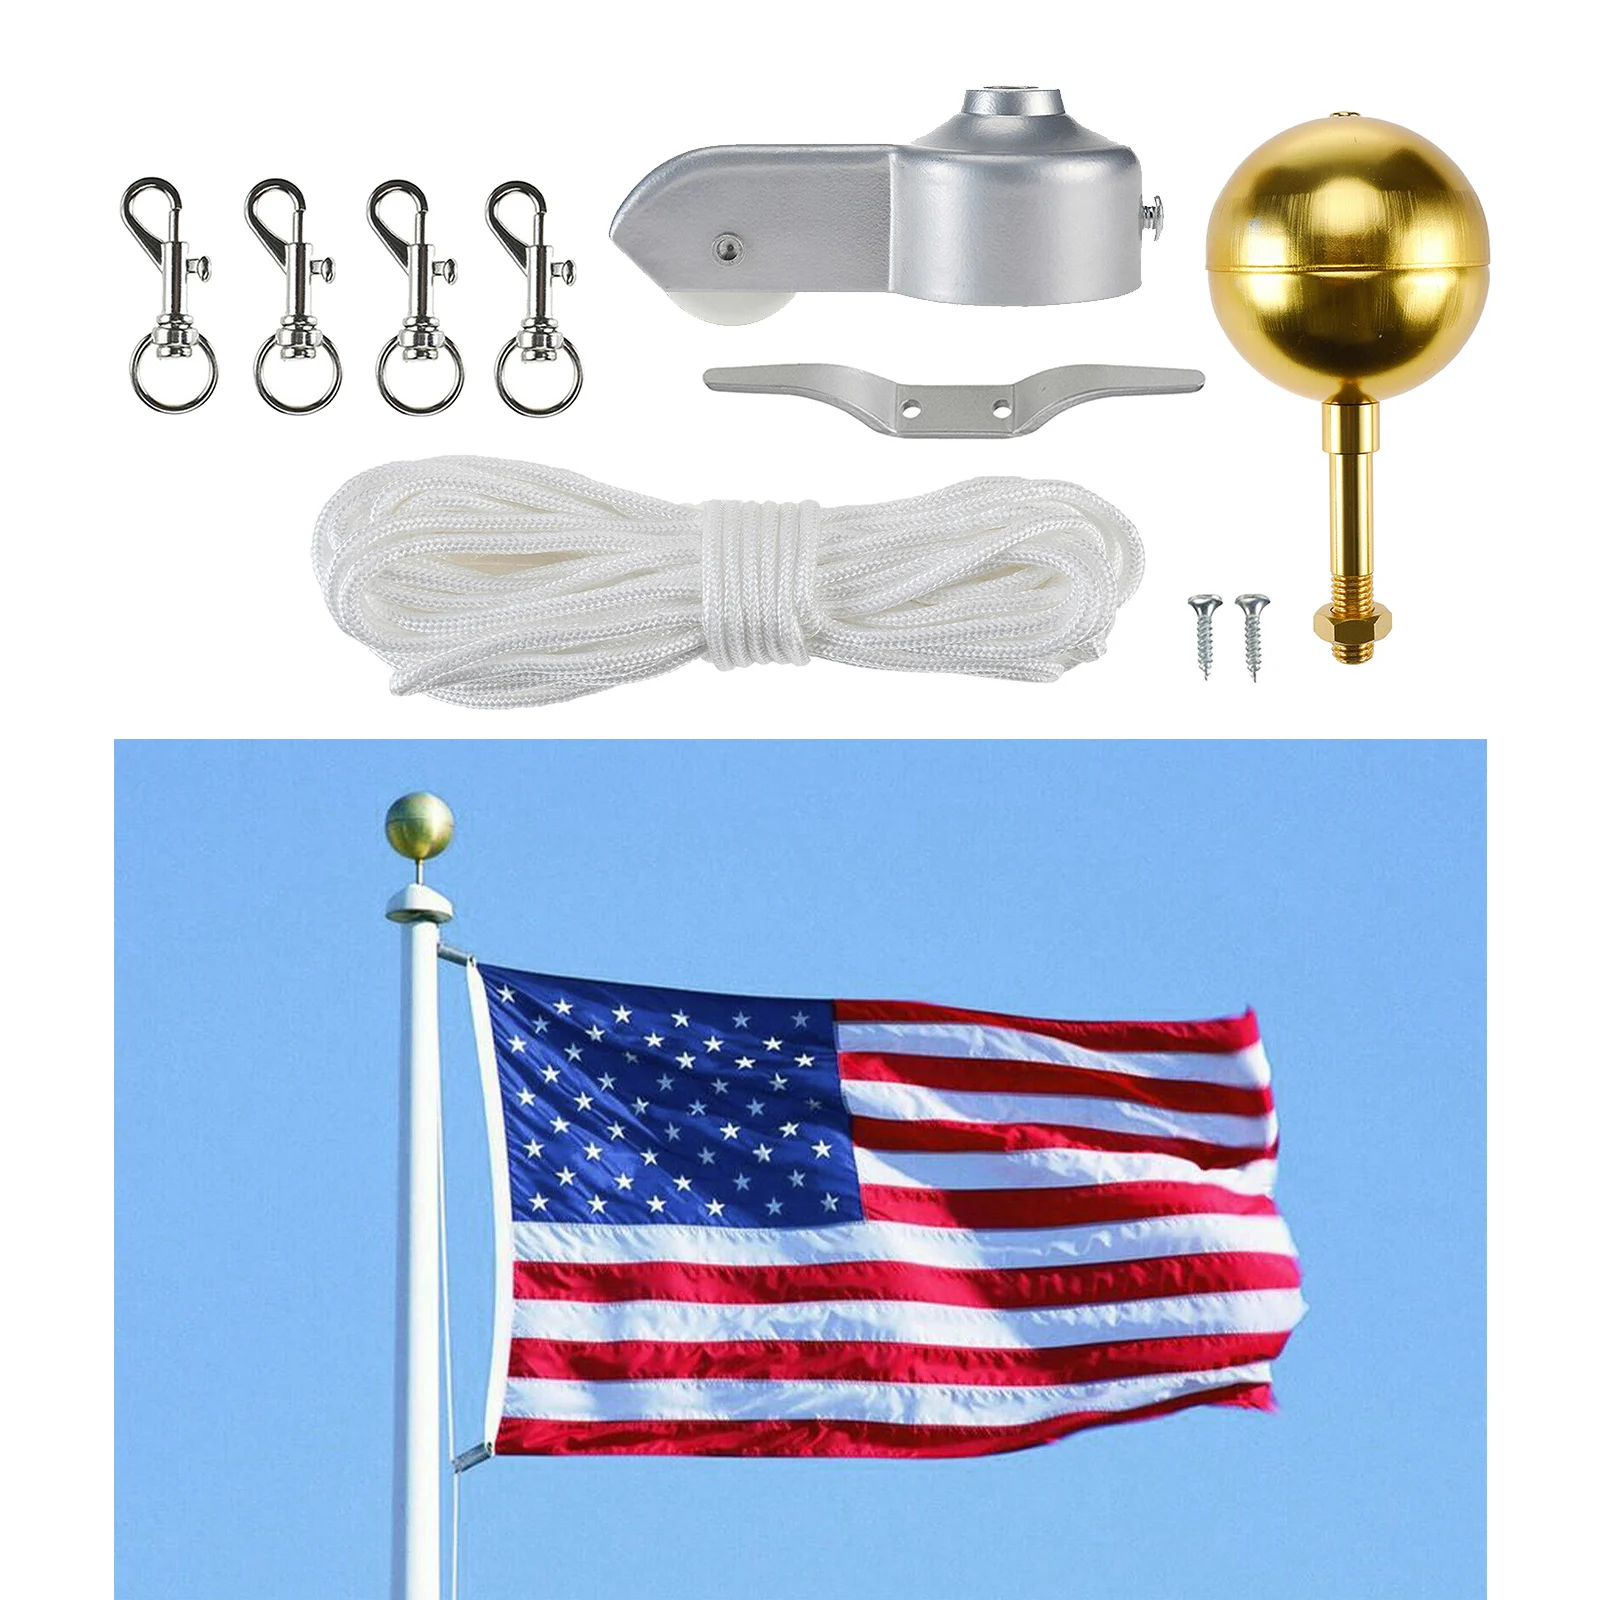 3 Topper Gold Ball/50 Ft Halyard Rope/6 Cleat Hook/4-Count Swivel Snap Hooks/Flagpole Pulley Truck for 2 Top PISSION Flag Pole Repair Kits 2021 Version 